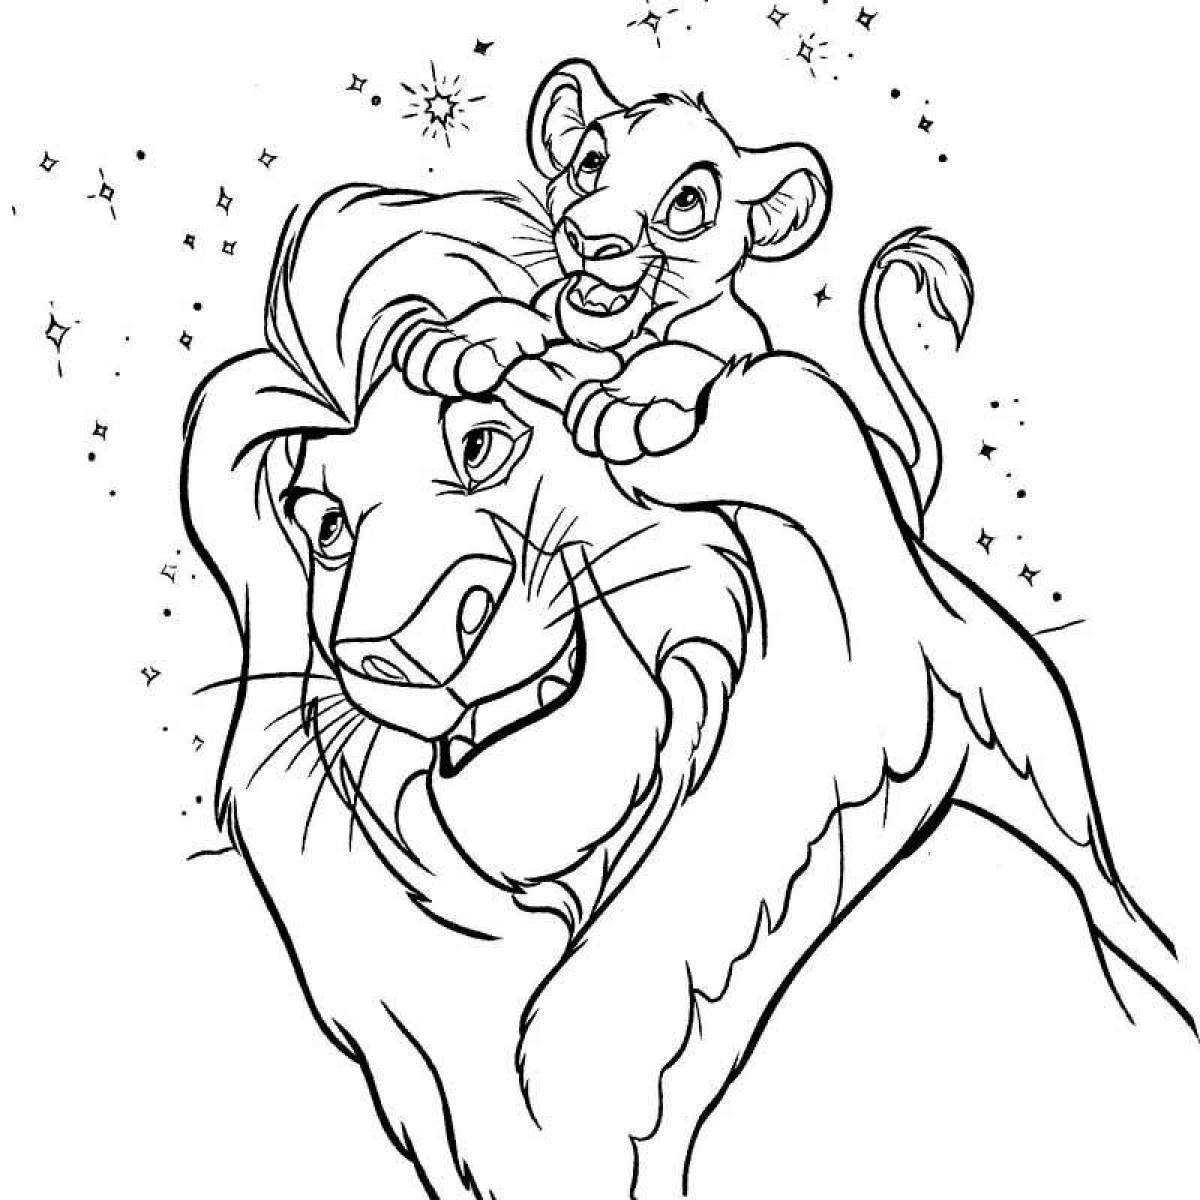 Colorful lion king coloring page